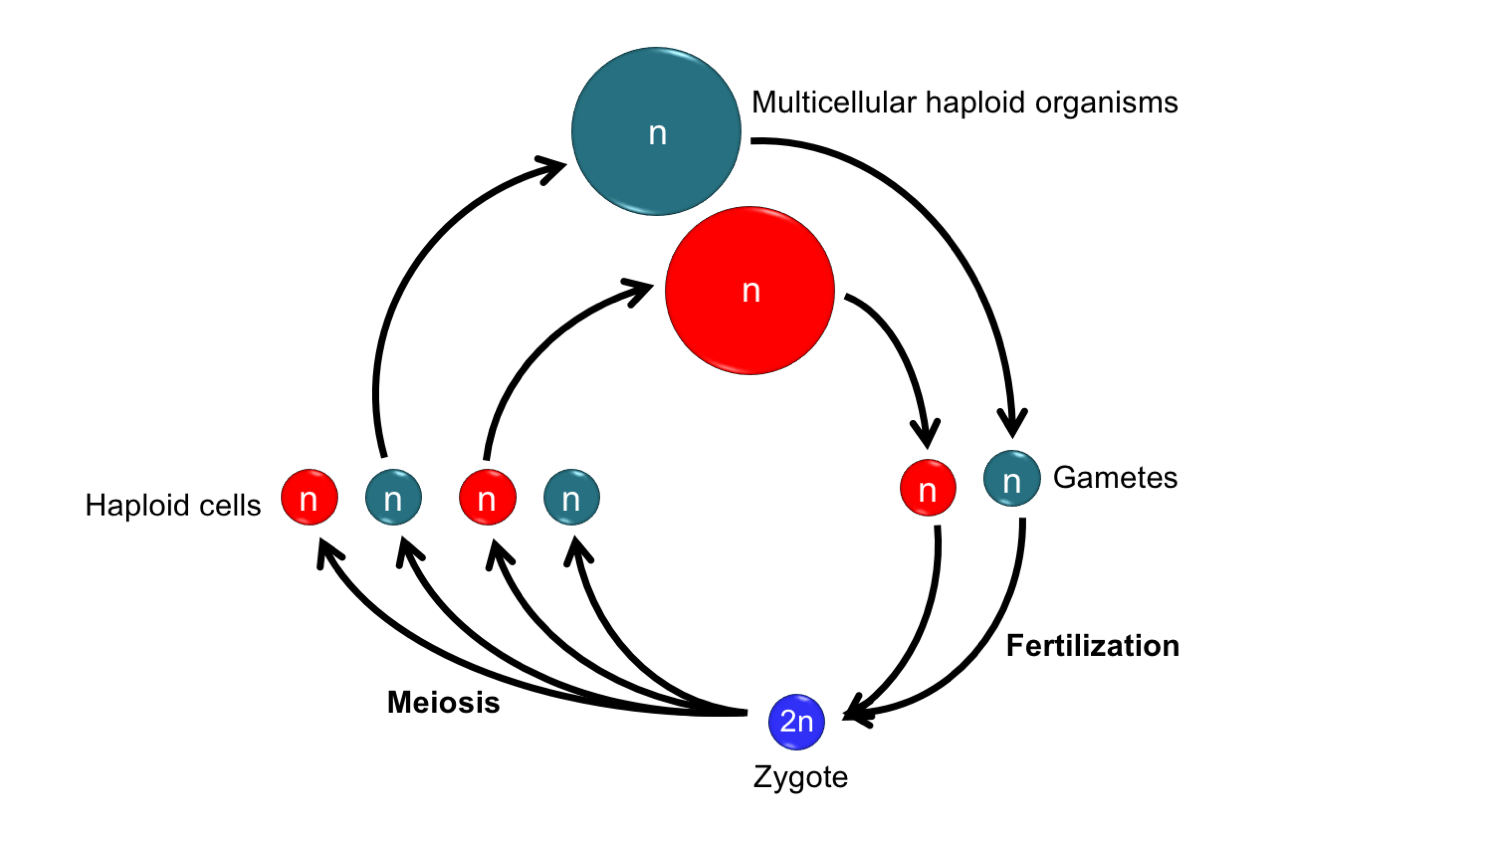 Life cycle of an organism with a haplontic life cycle.